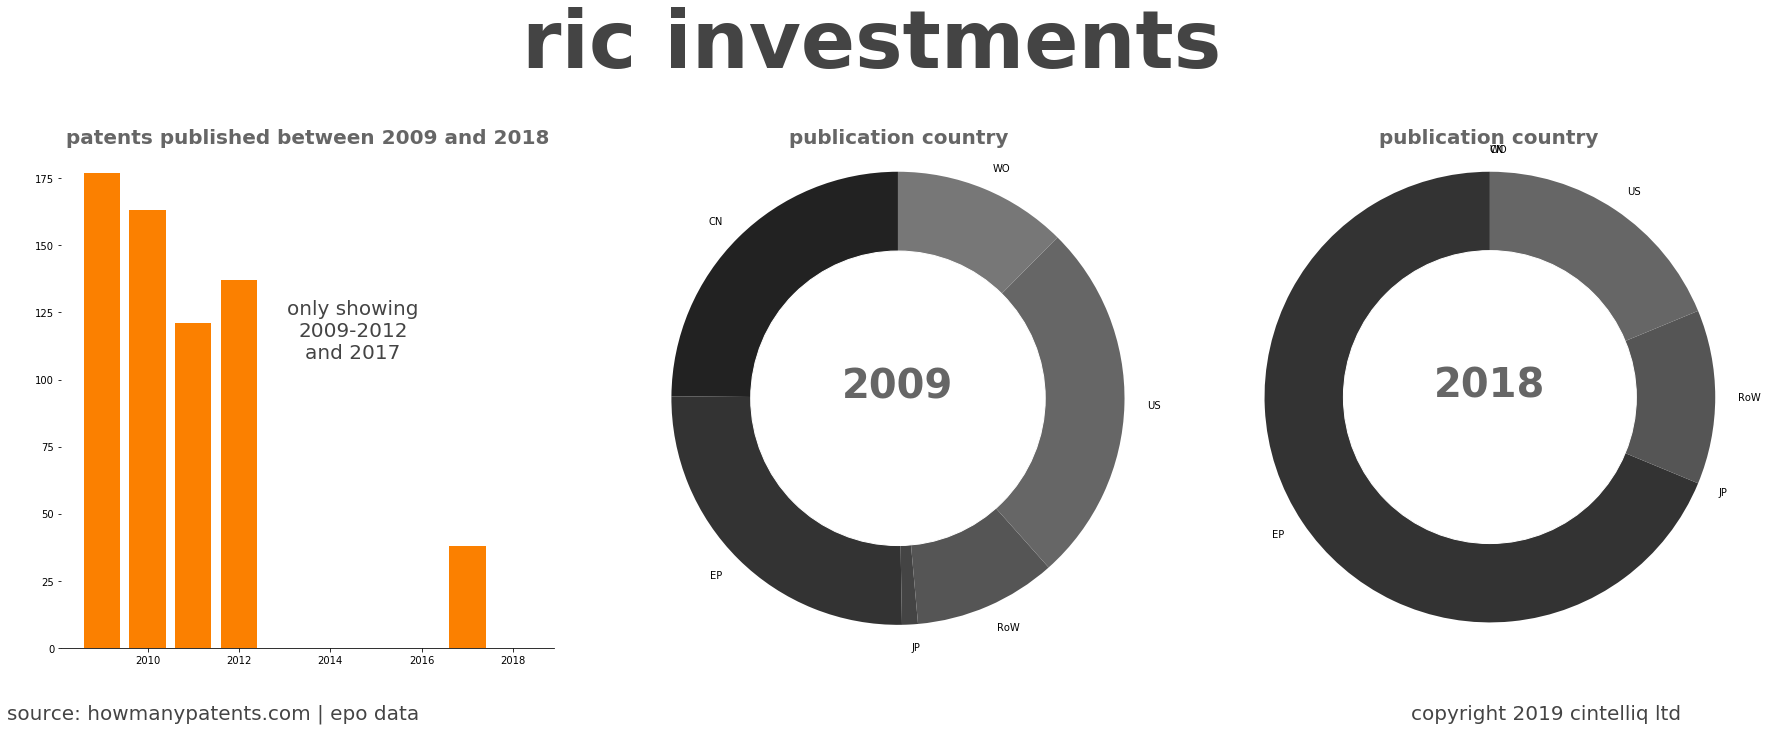 summary of patents for Ric Investments